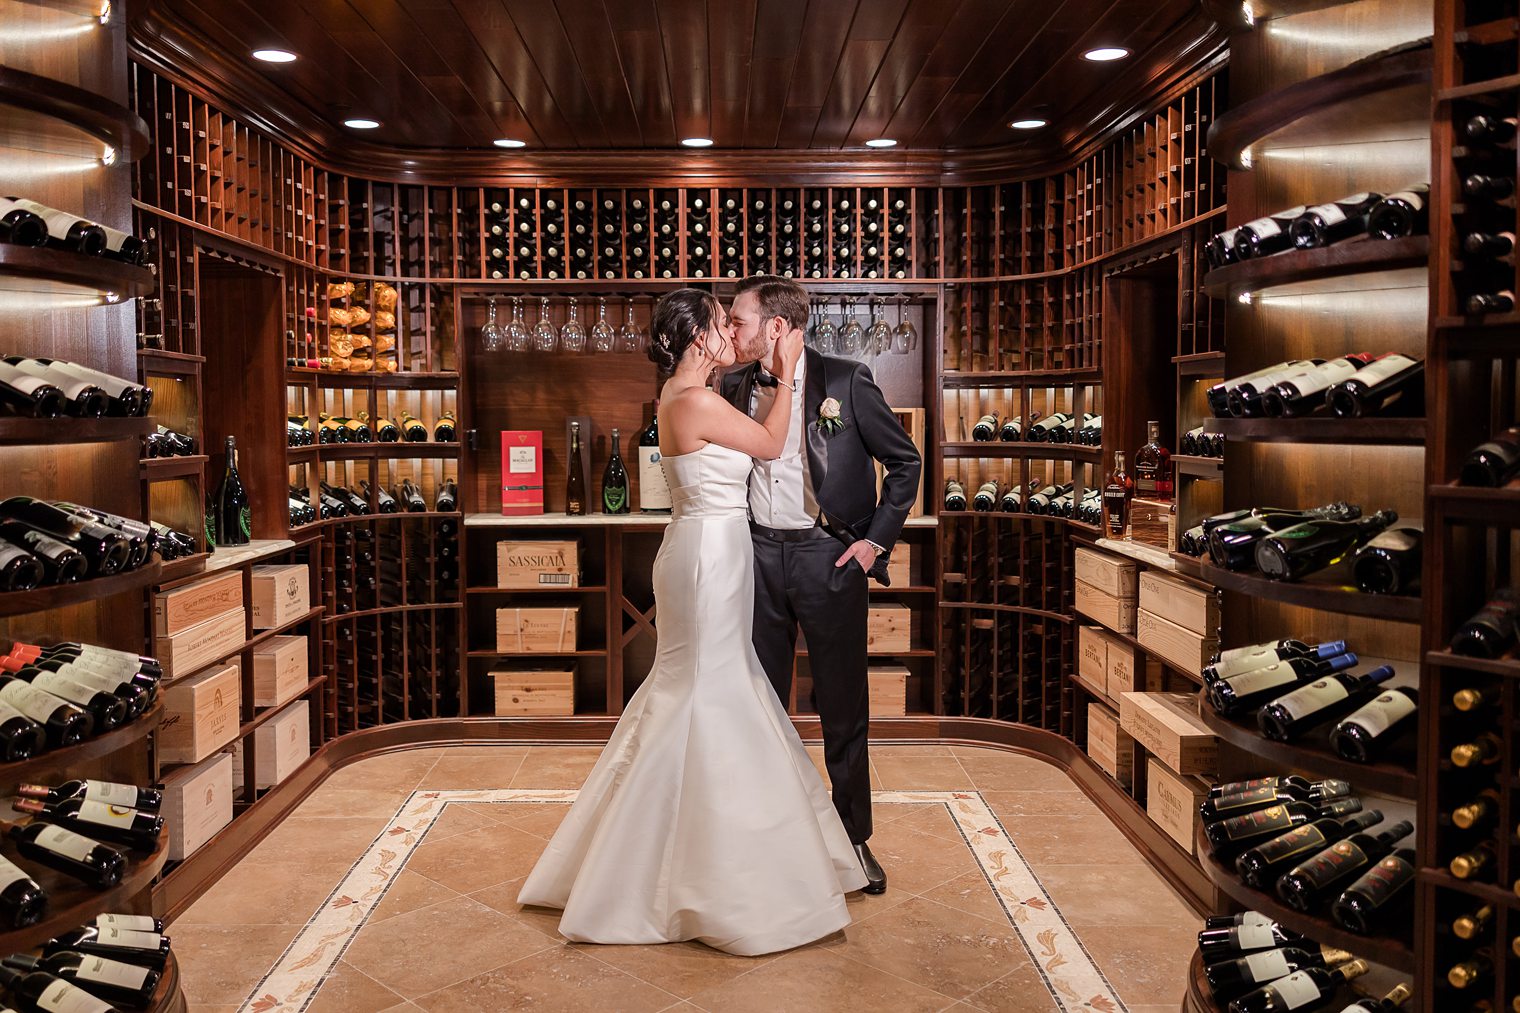 husband and wife sharing a kiss n the wine cellar